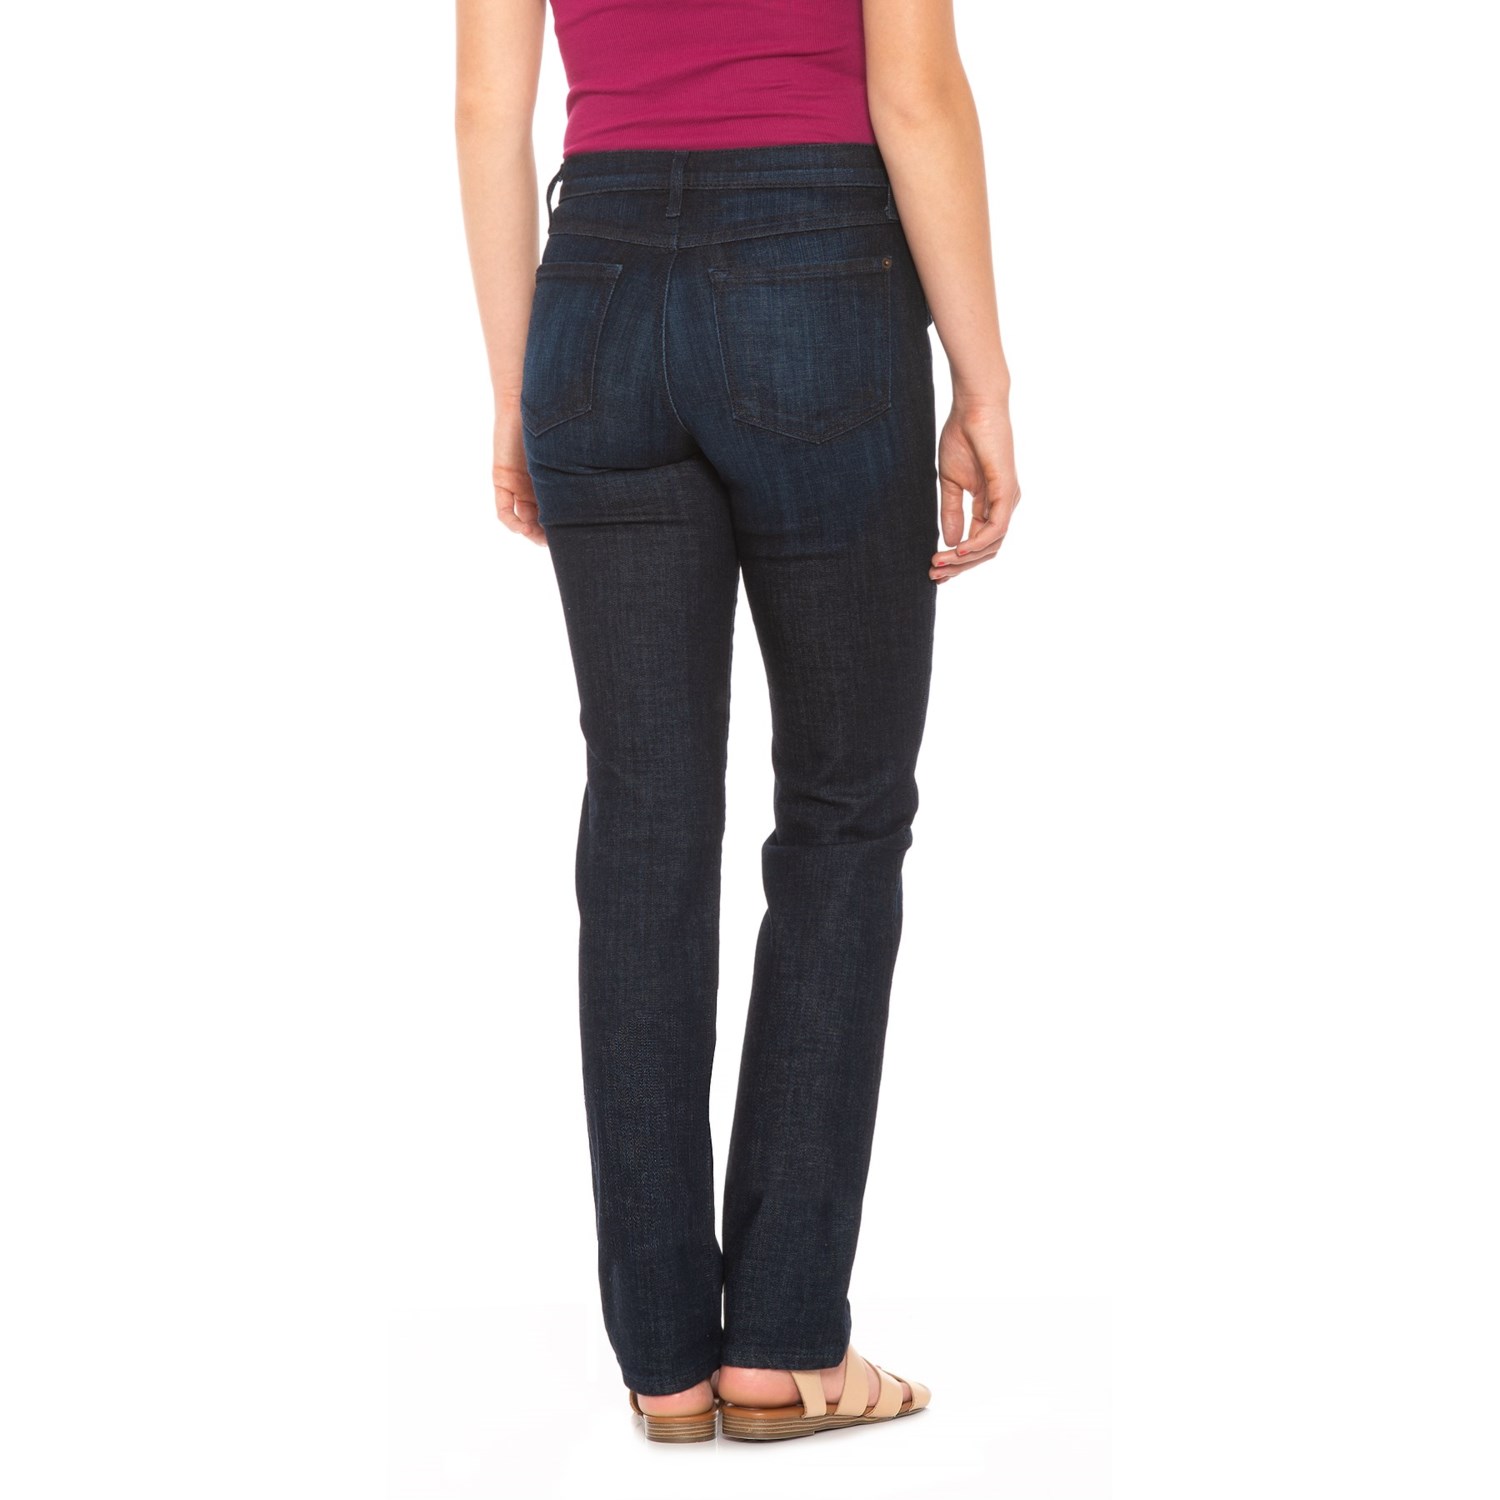 Yoga Jeans Classic High-Rise Straight-Leg Jeans (For Women) - Save 77%